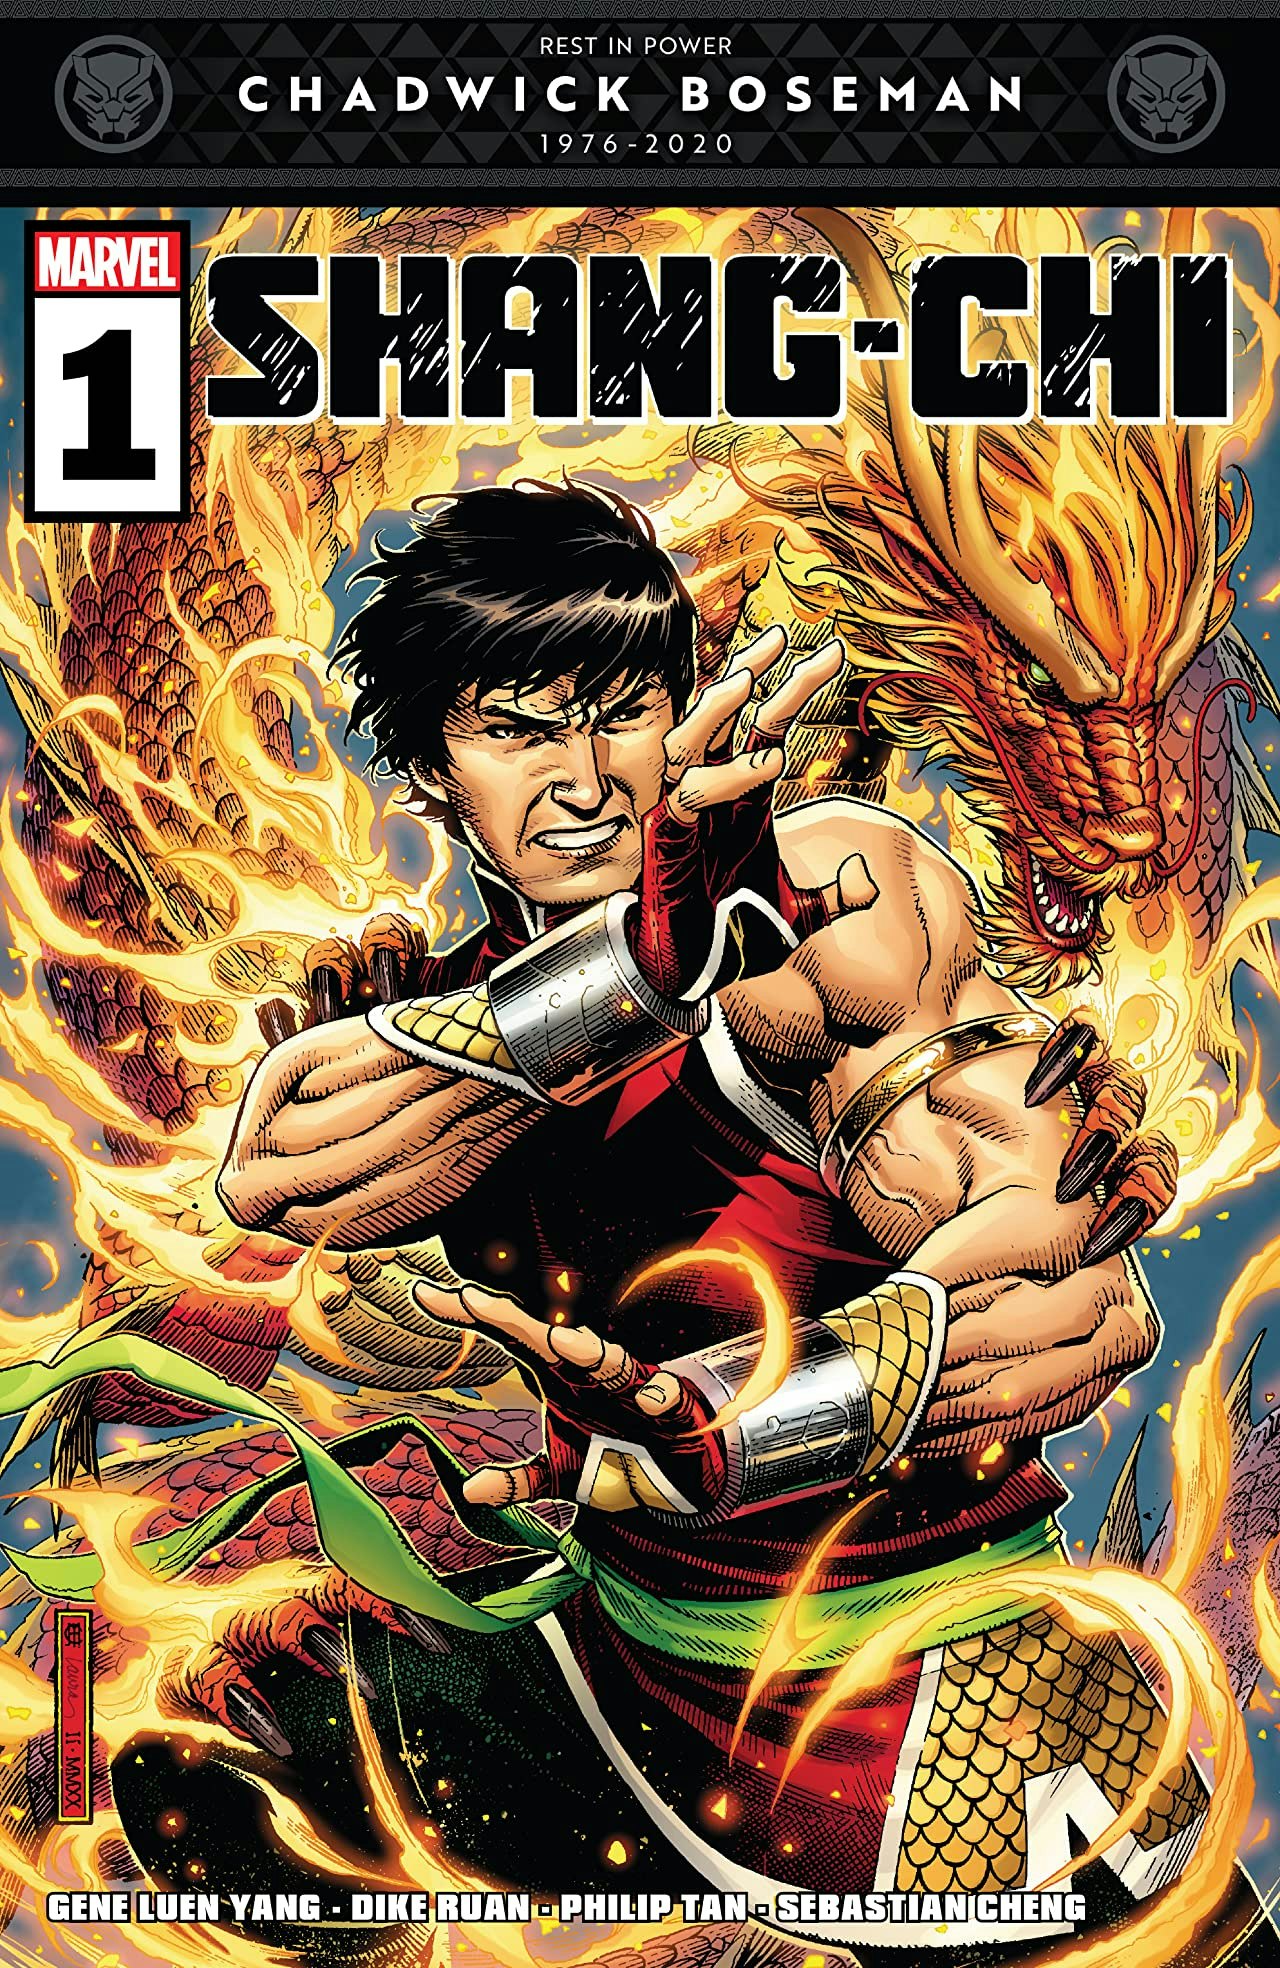 Comics: 6 reasons why Shang-chi is one of Marvel's coolest